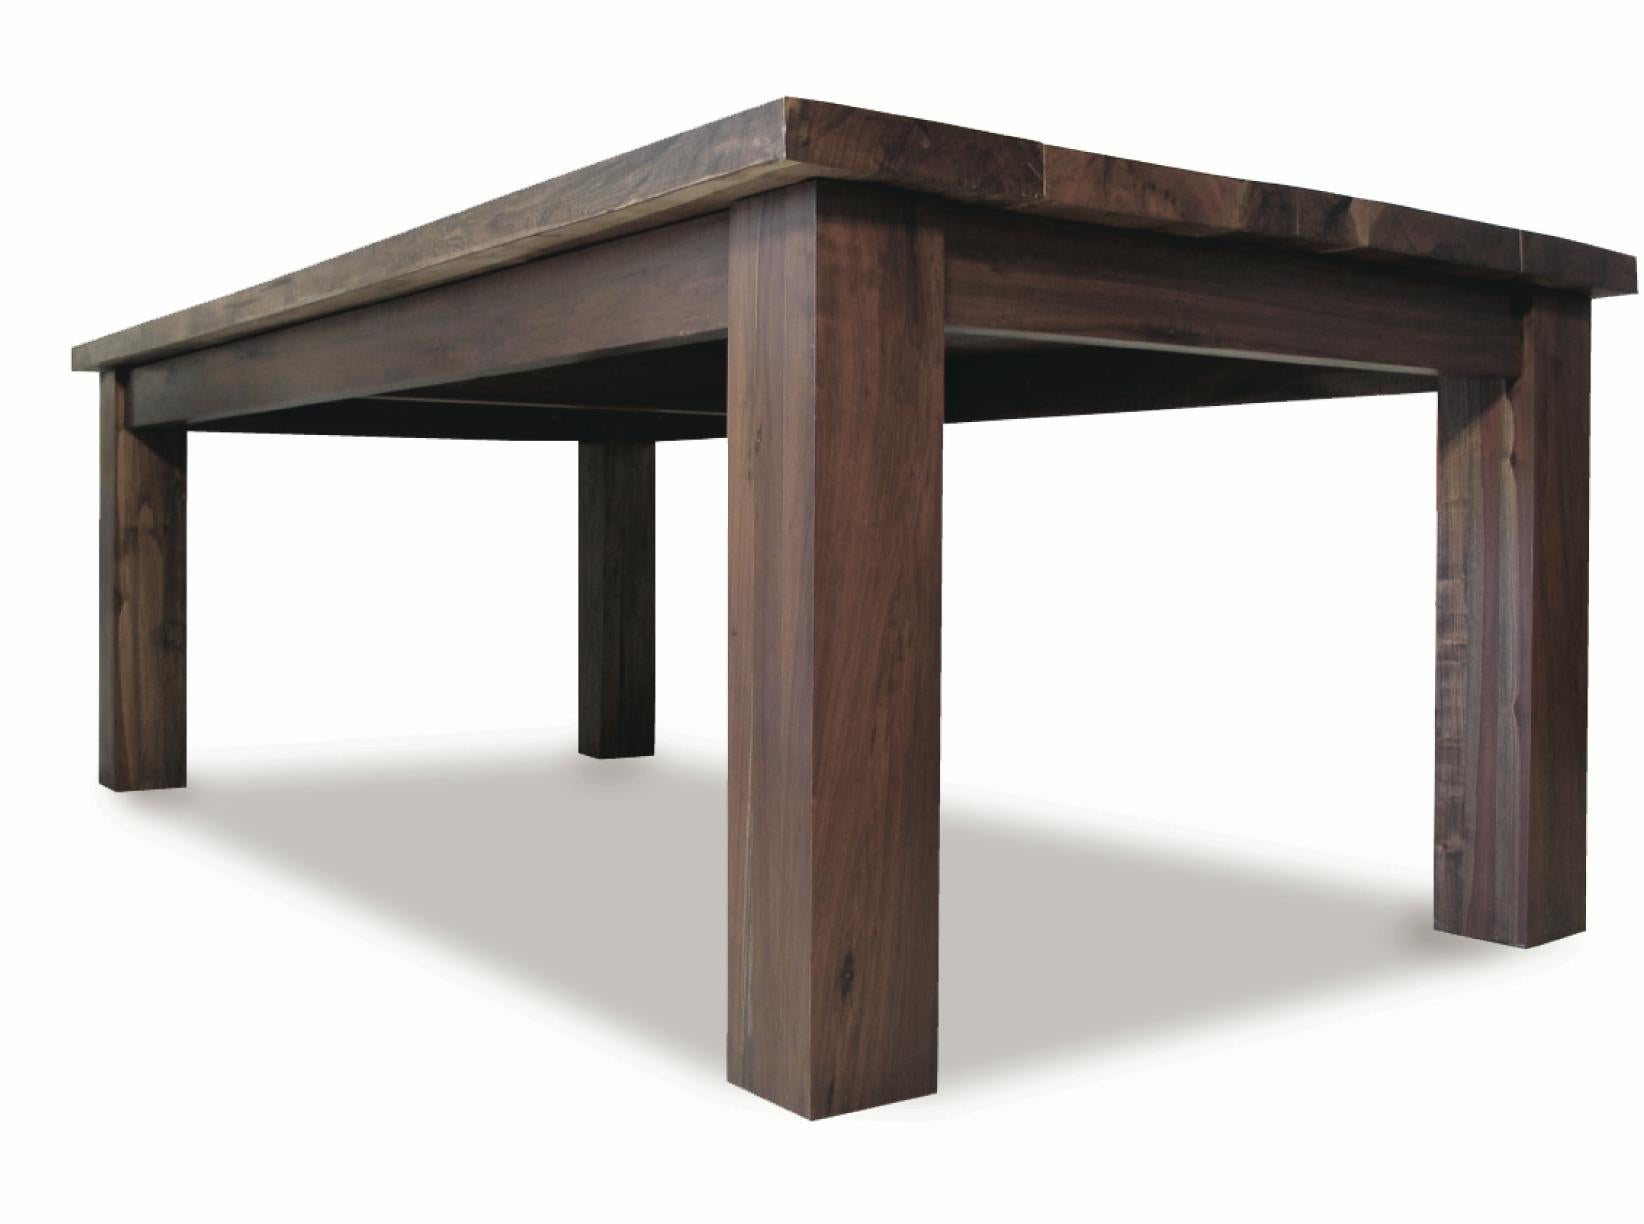 Exotic Solid Wood Modern Outdoor Dining Table from Costantini, Serrano In New Condition For Sale In New York, NY